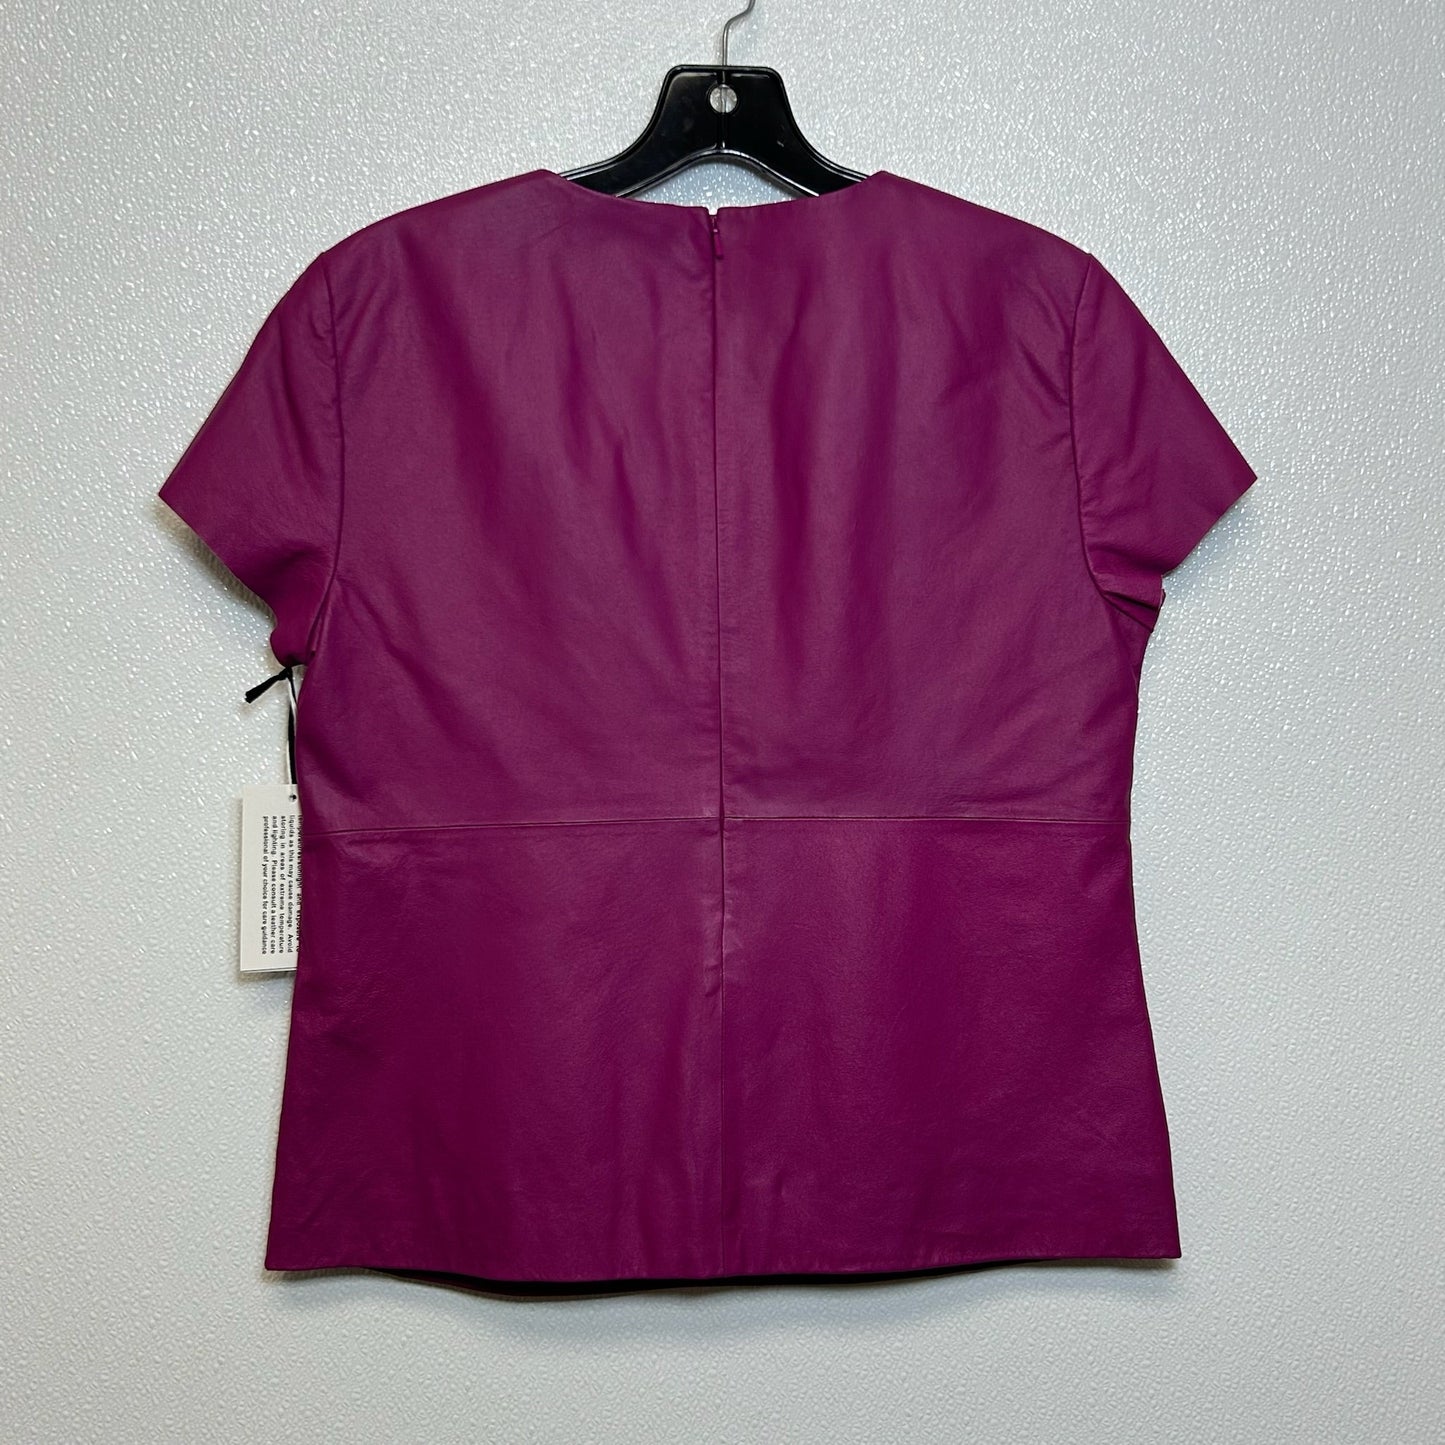 Wine Top Short Sleeve Clothes Mentor, Size 6